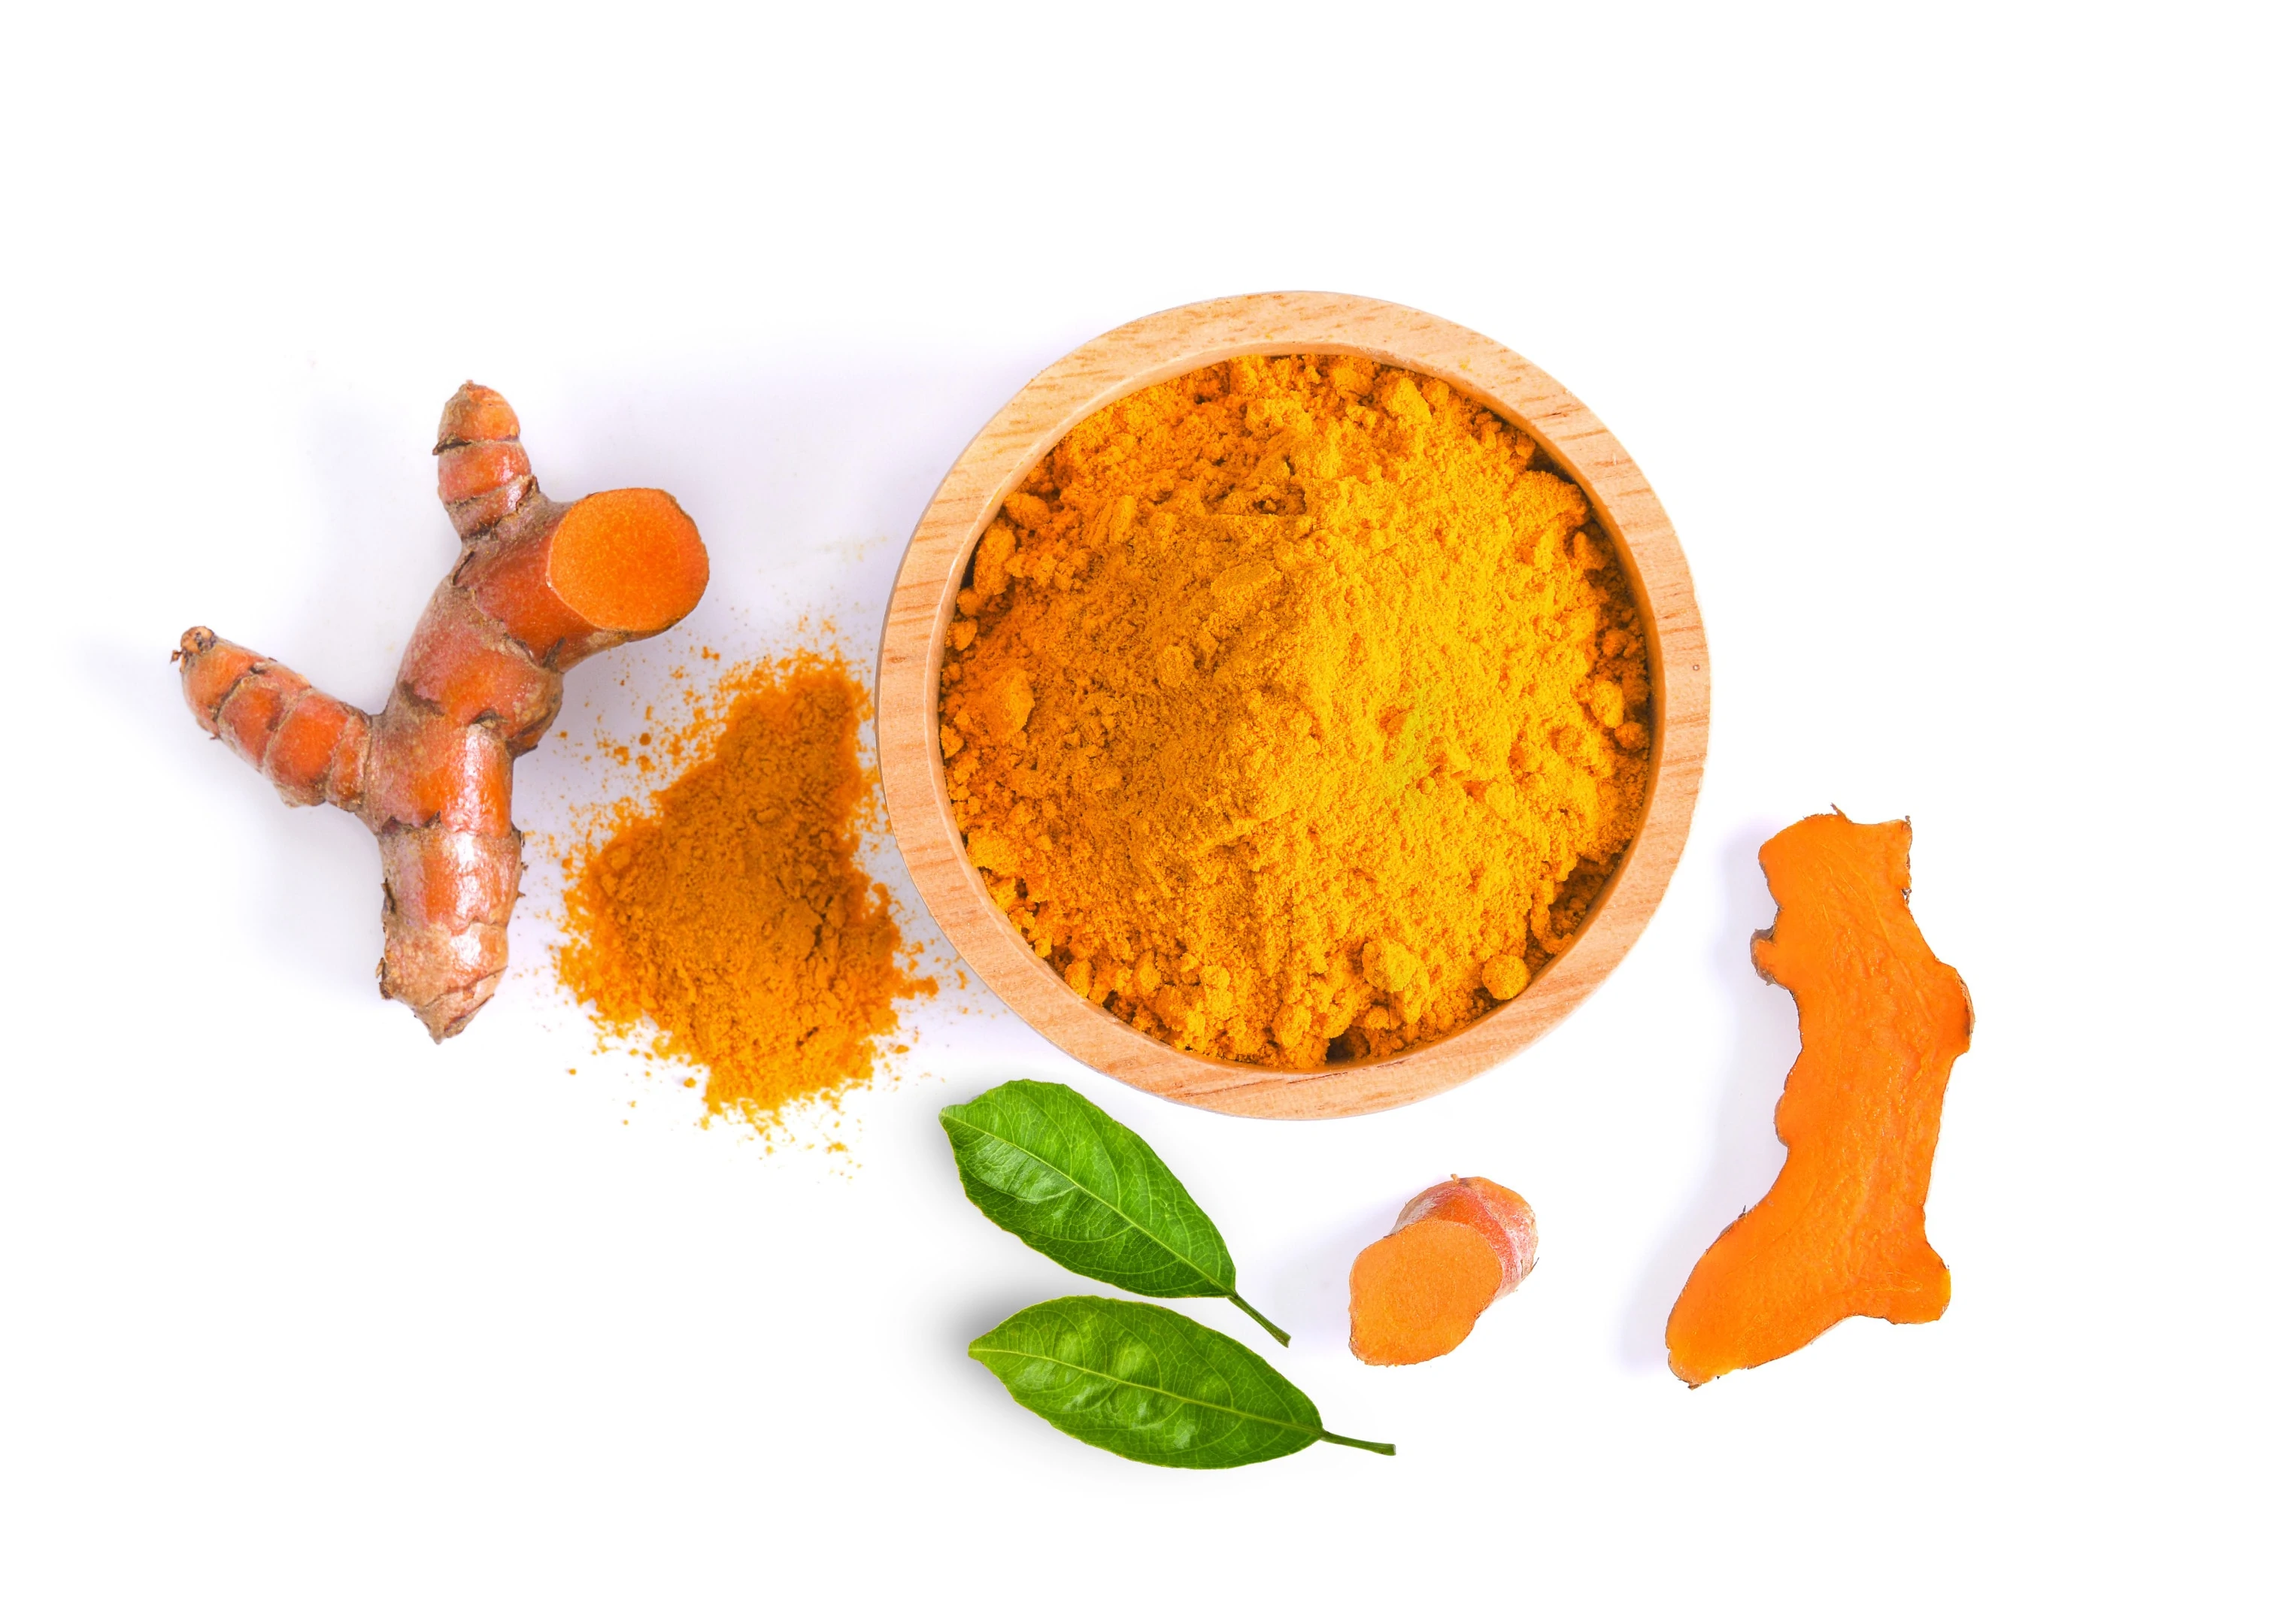 Turmeric root and powder on white background